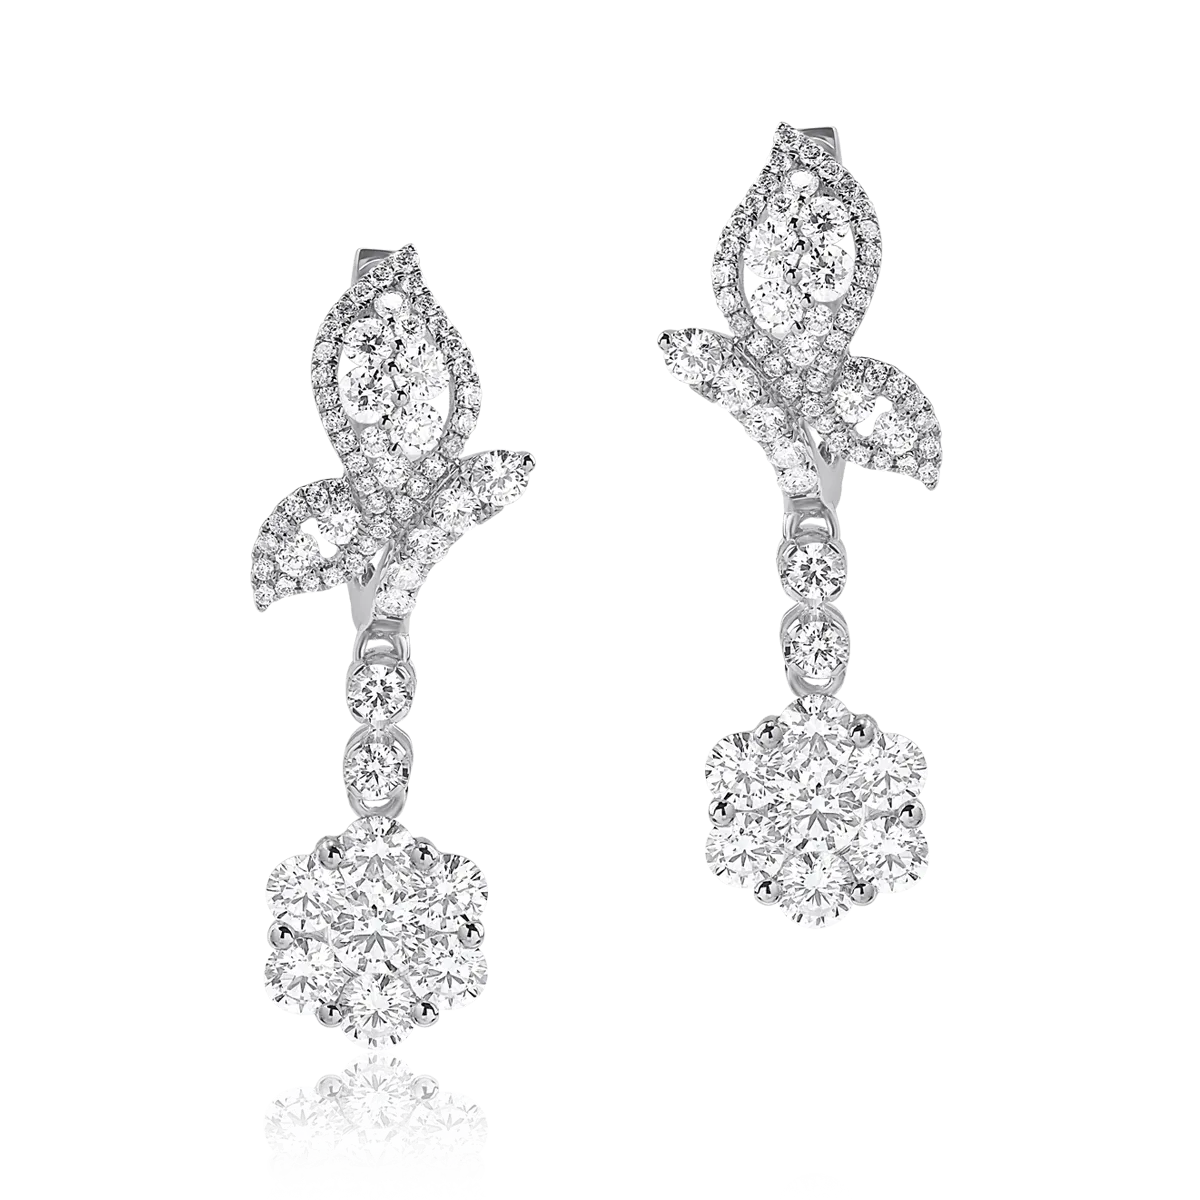 18K white gold earrings with 2.03ct diamonds